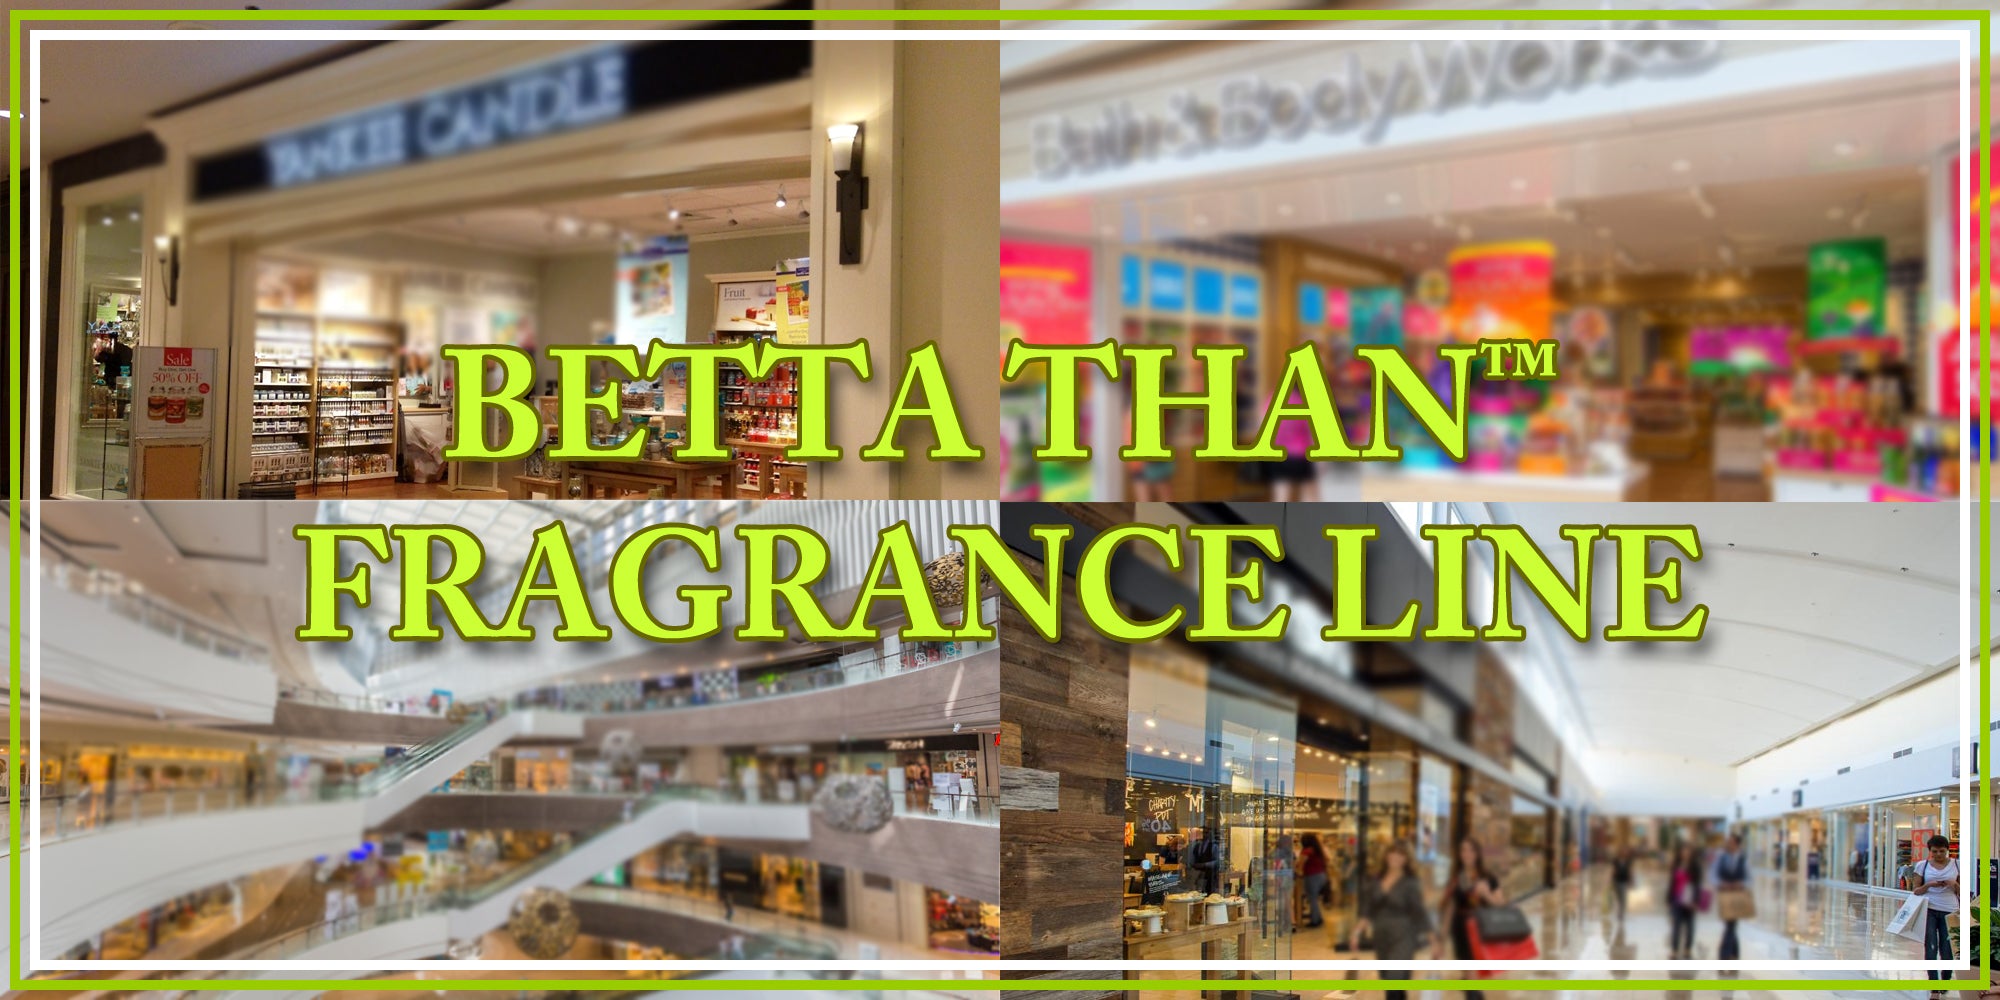 OverSoyed Fine Organic Products - Betta Than™ Fragrance Line